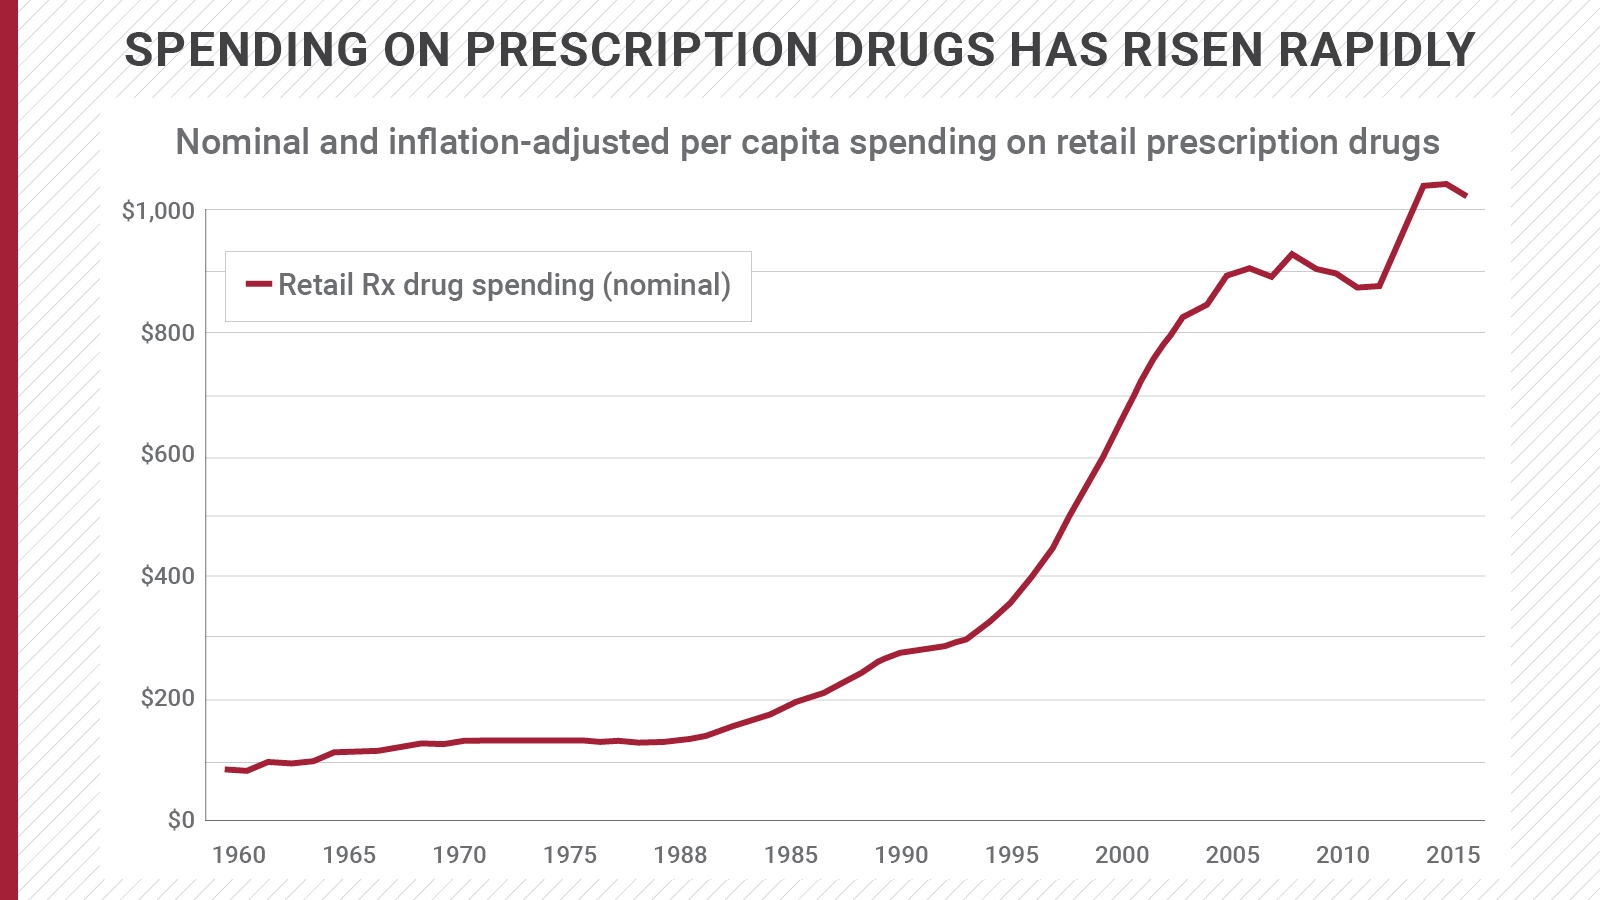 The Real Price of Medications